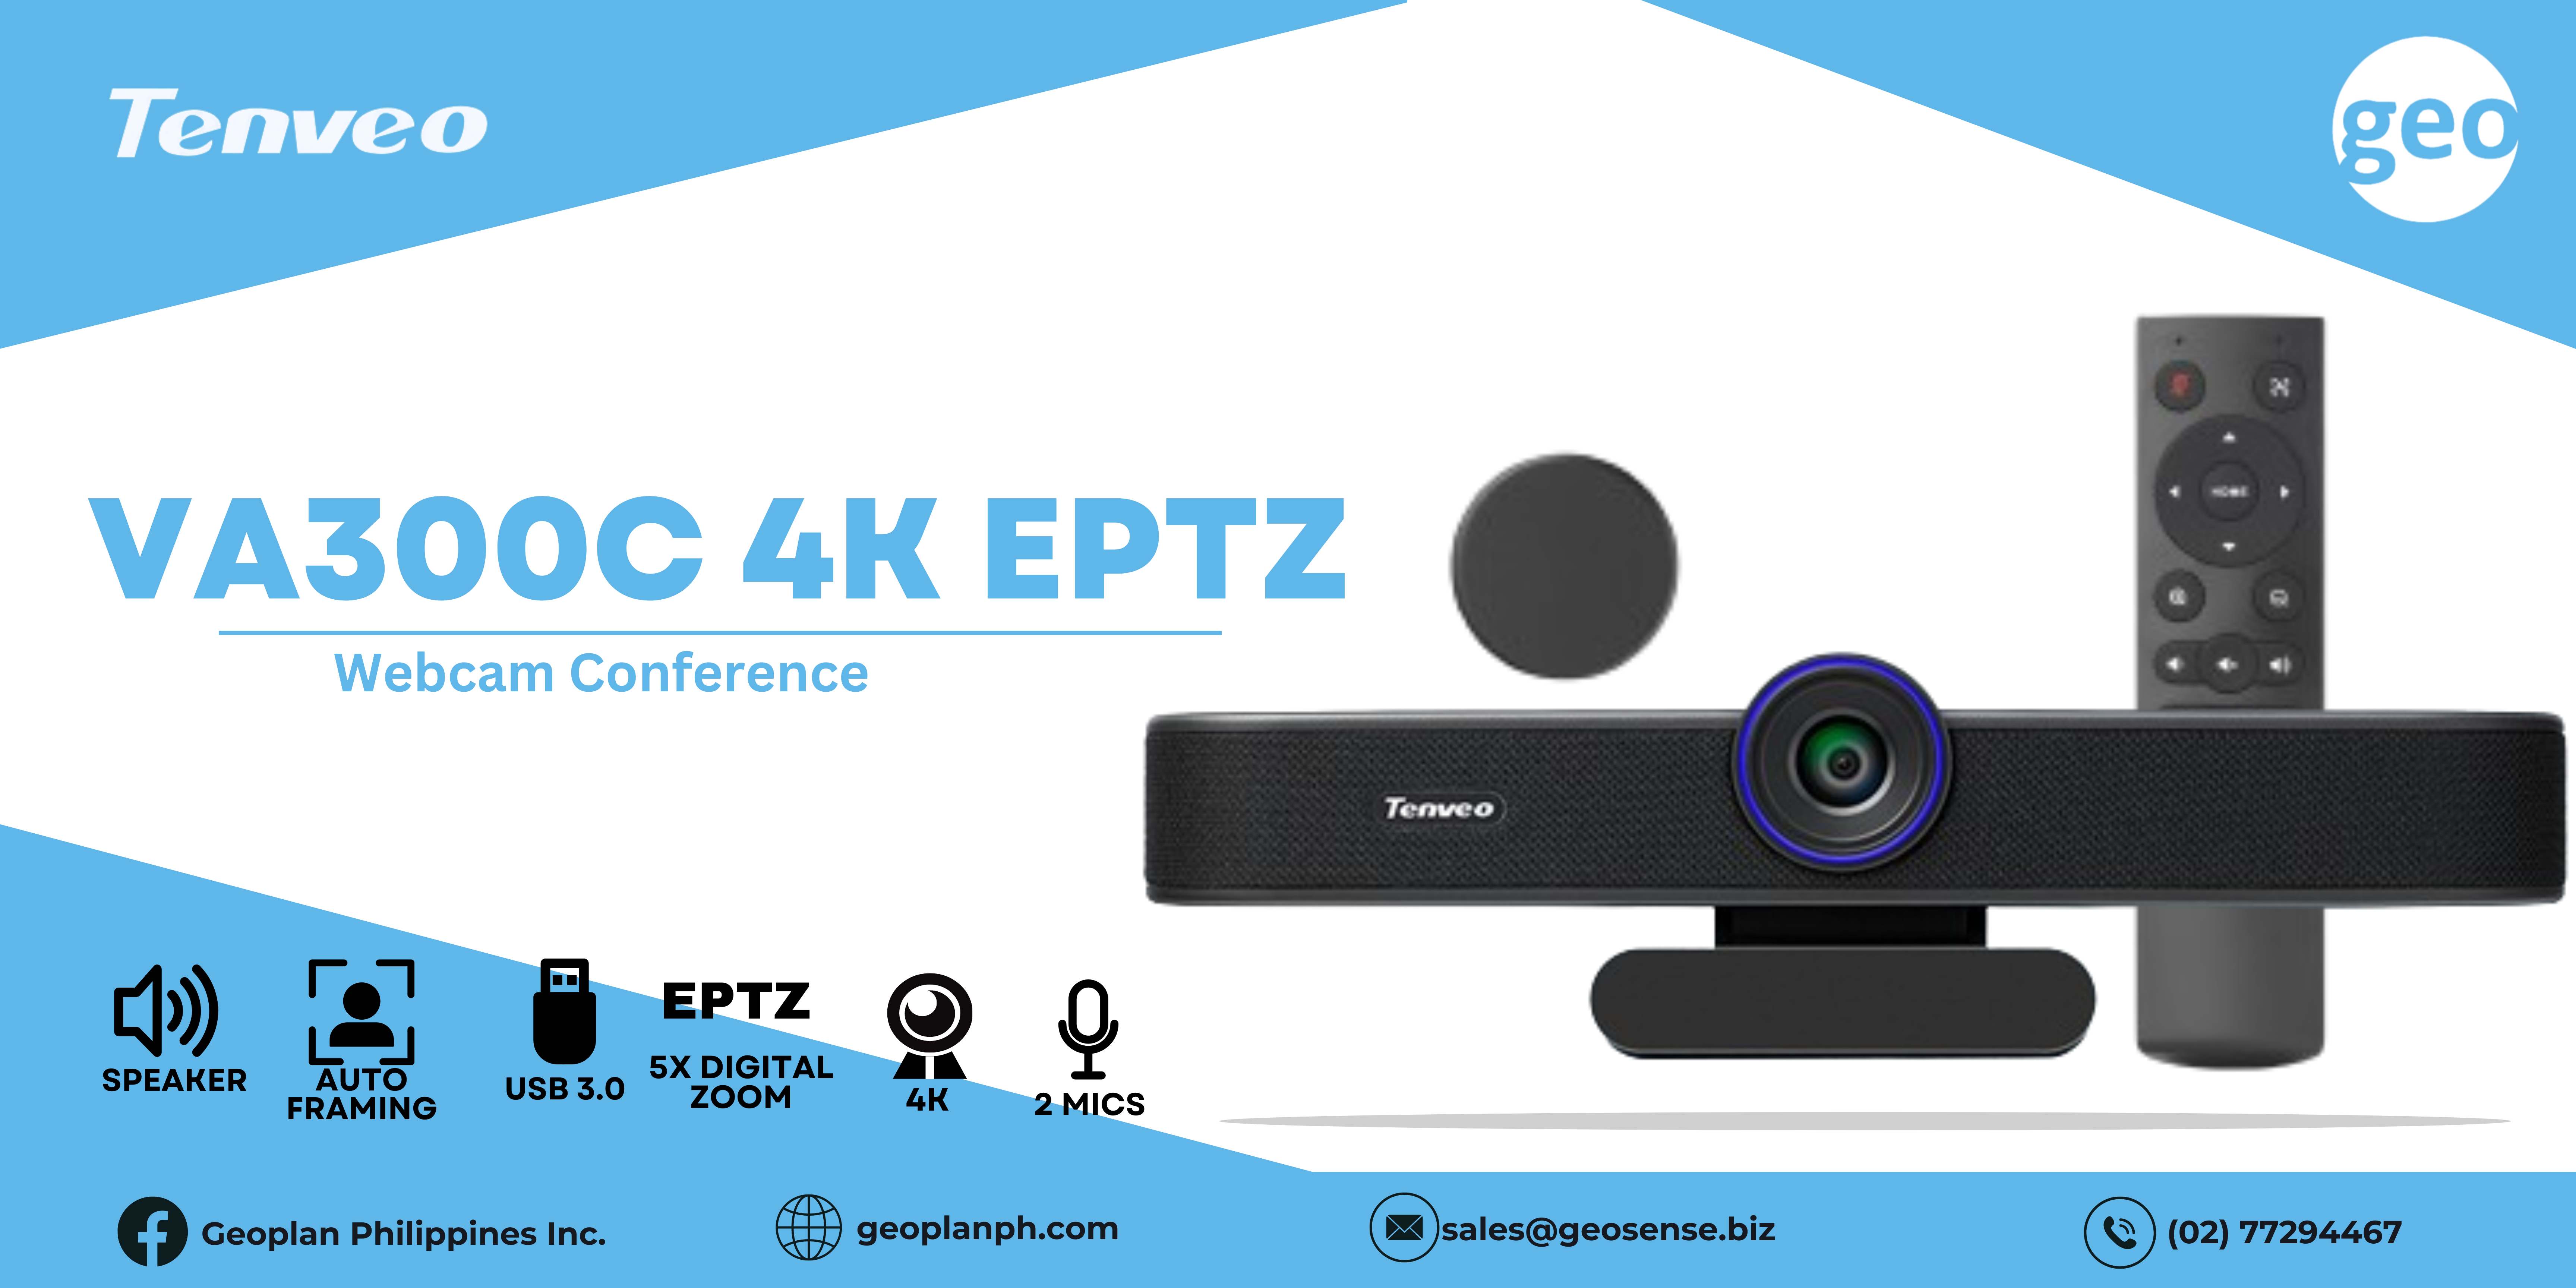 Tenveo: Empower Your Conferencing with the VA300C 4K EPTZ Webcam